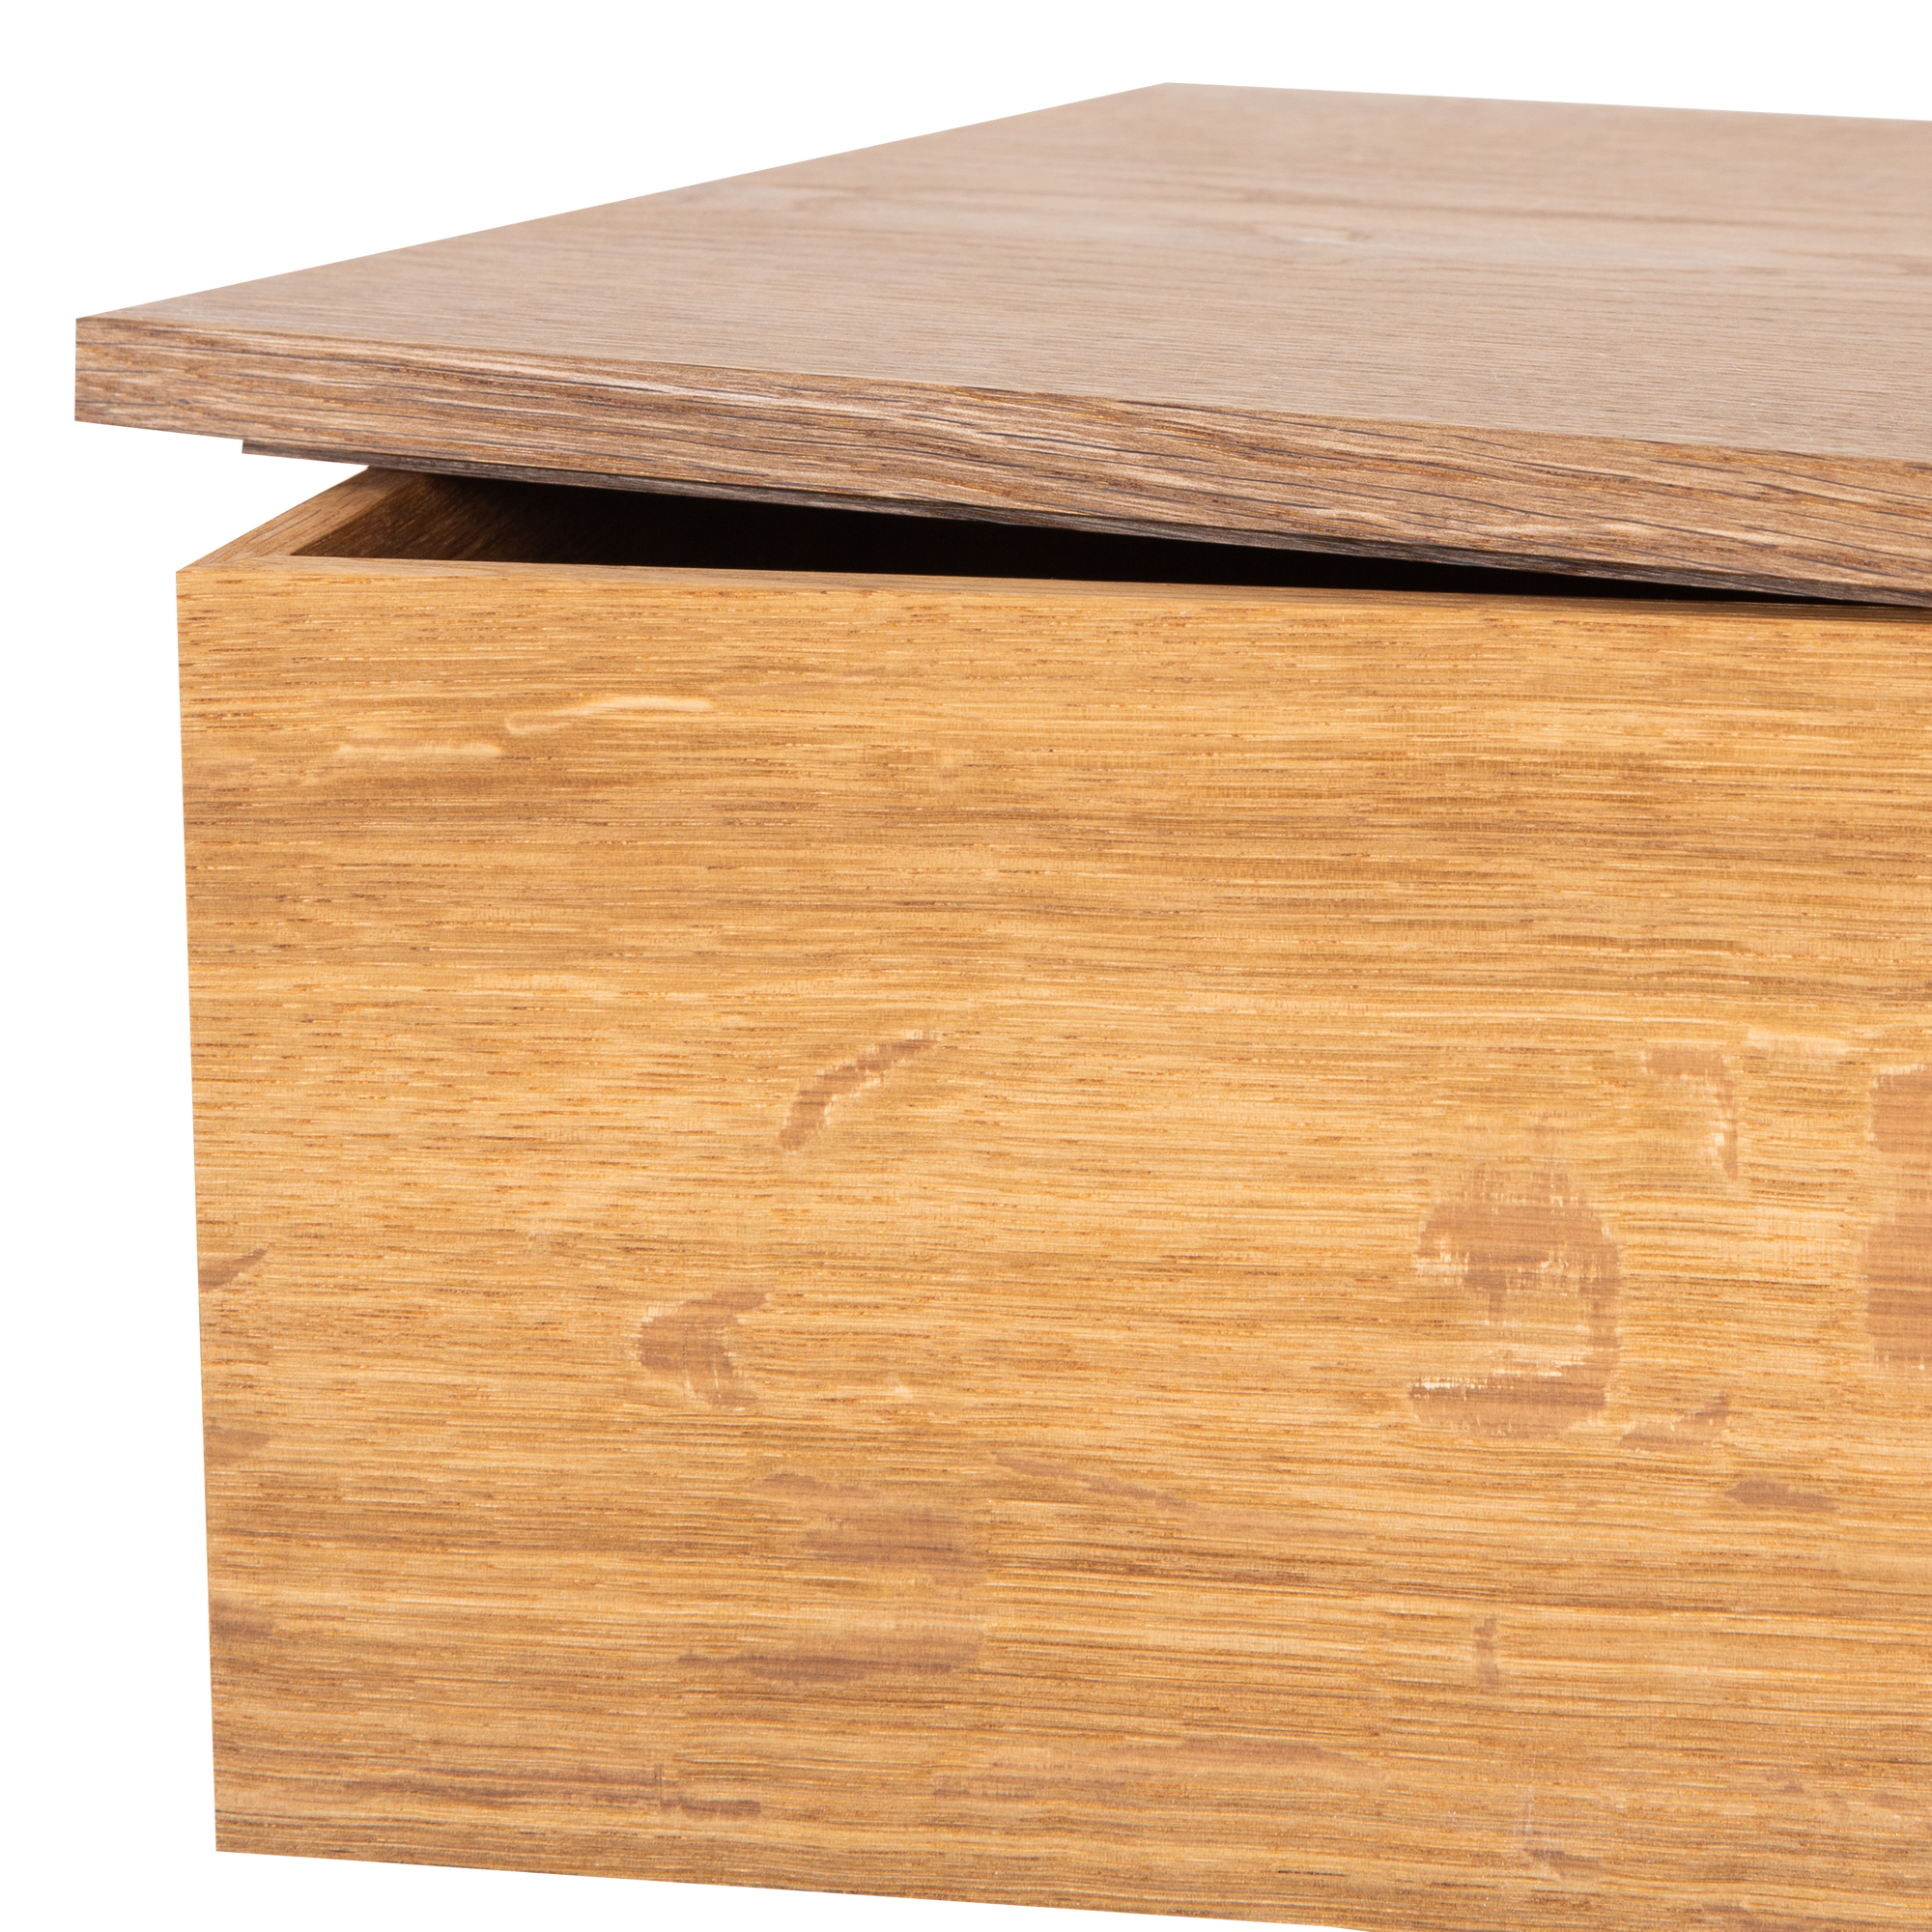 Made of natural oak from the Black Forest in Germany, the Oak Box features a straightforward design that diverts the focus onto its extravagant and dynamic natural oak grain.